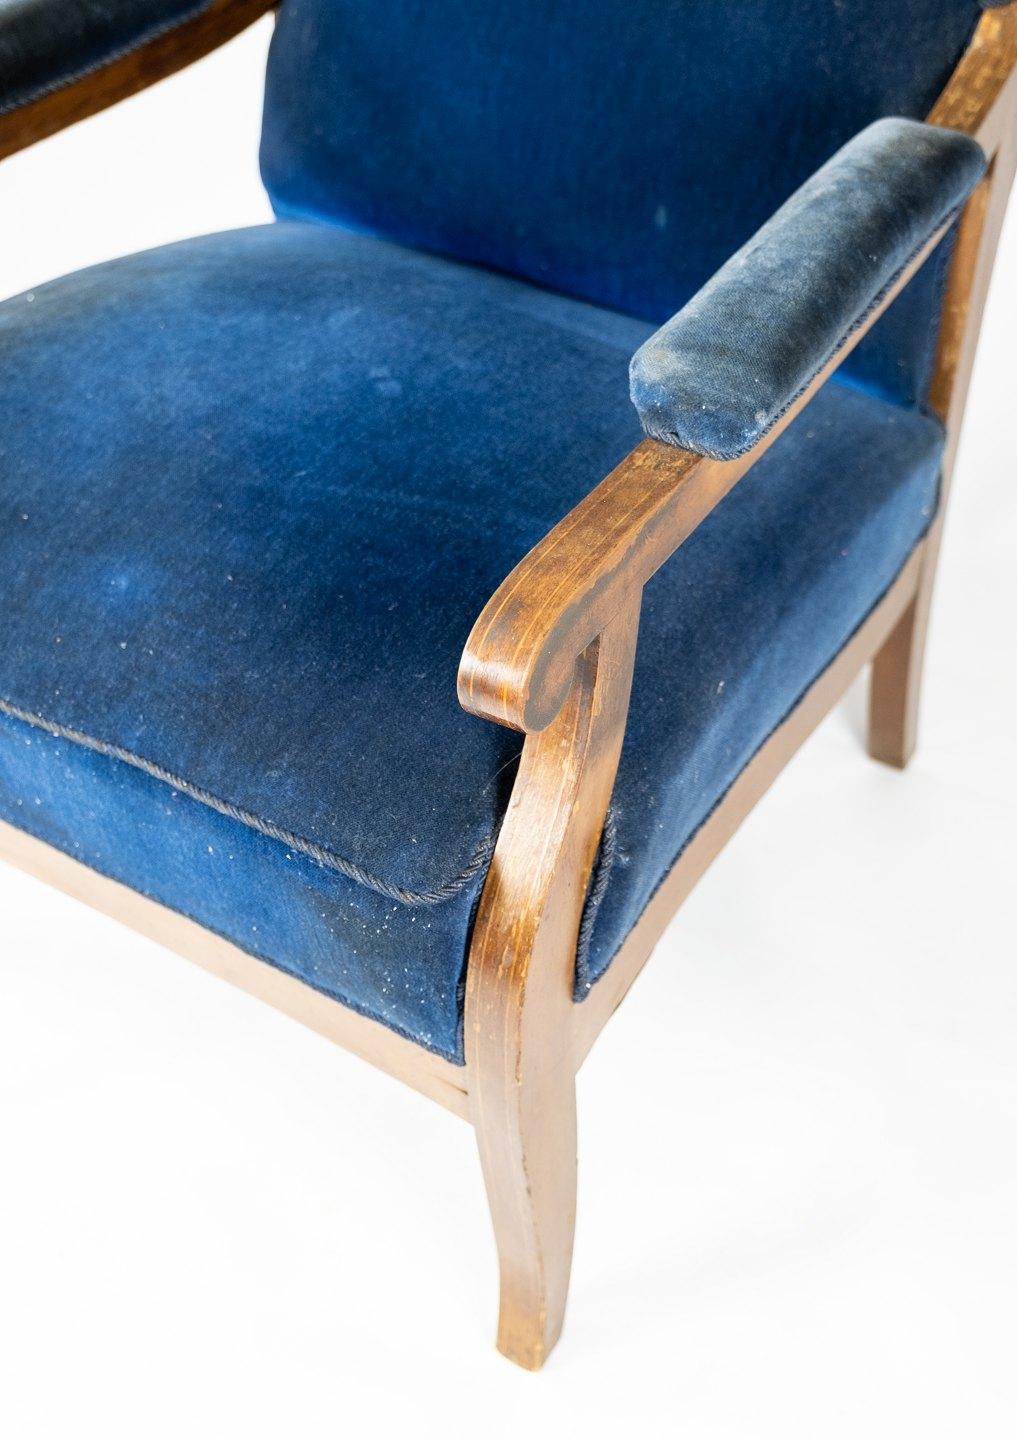 The armchair, designed by Fritz Henningsen, combines luxurious comfort with timeless elegance. Upholstered in sumptuous blue velvet and crafted with exquisite mahogany, it exudes sophistication and refinement. Henningsen's meticulous attention to